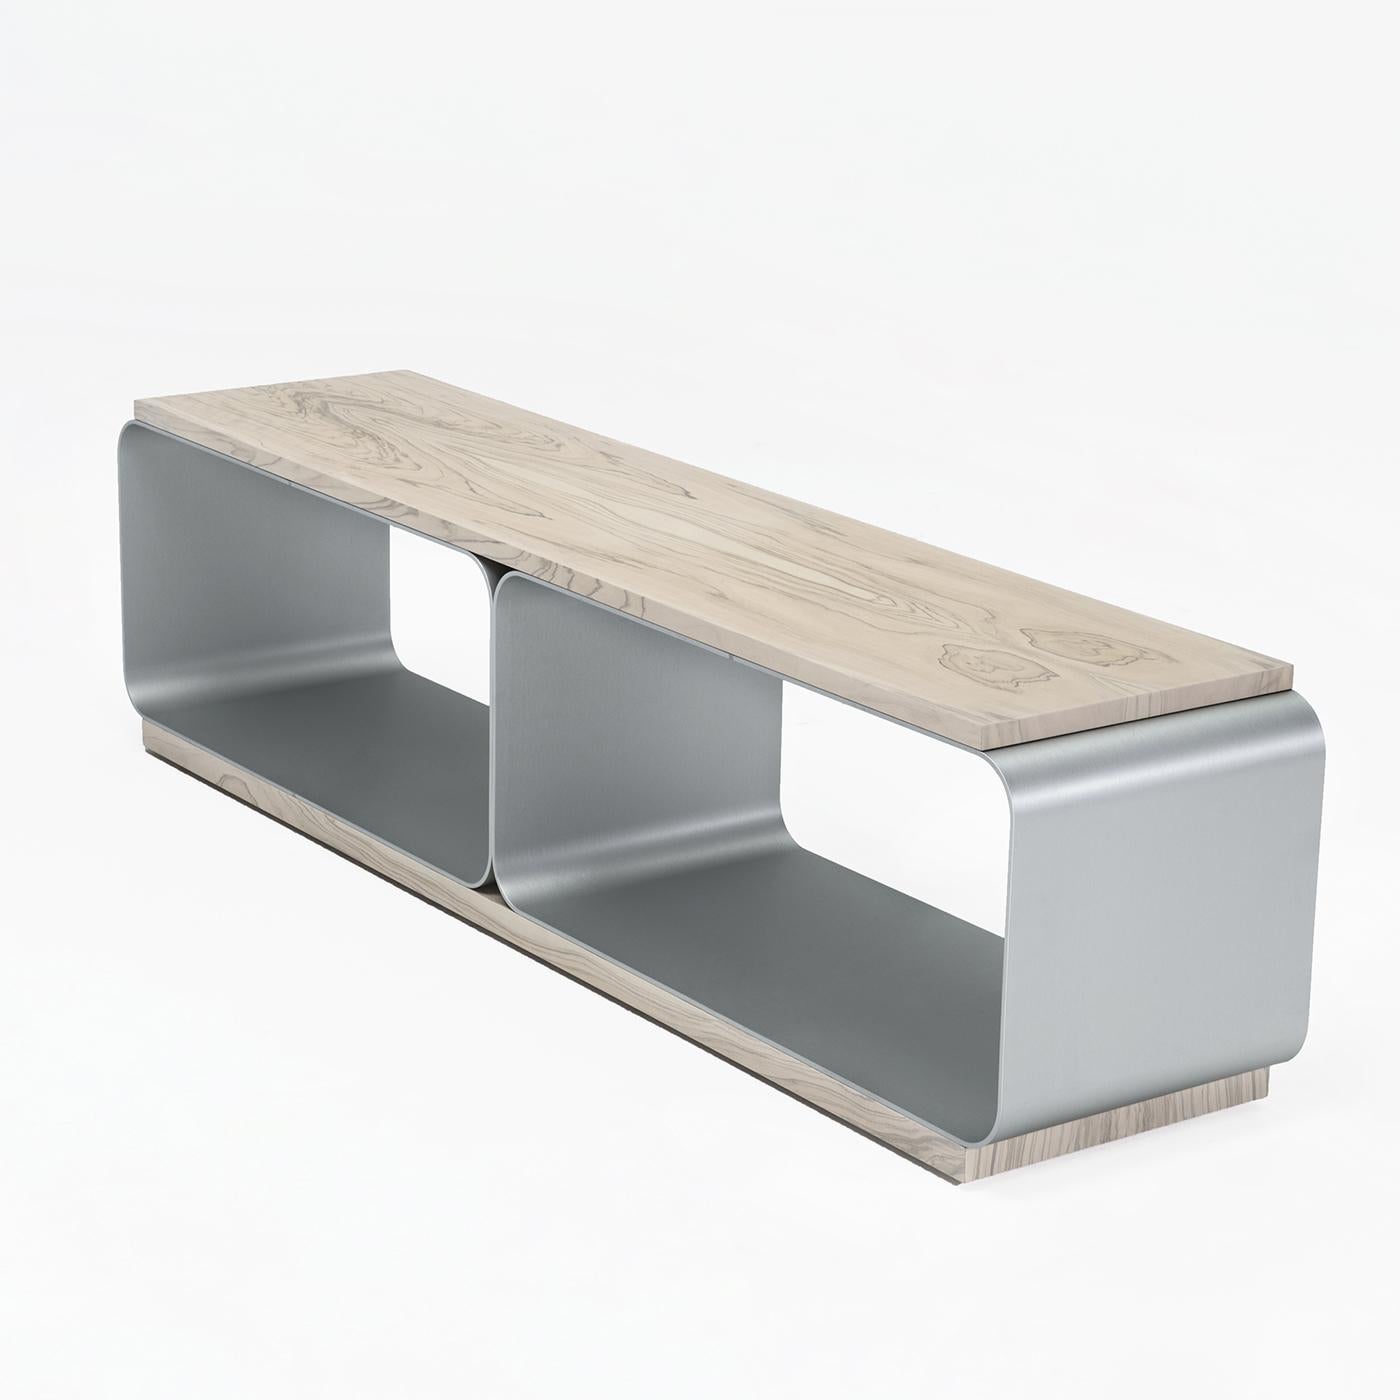 This bench is composed of two satin anodized aluminum supporting structures covered by an olive wood top with whitened finish. The two compartment, hollowed out base can be used to store shoes, books or other objects, making the item stylish and